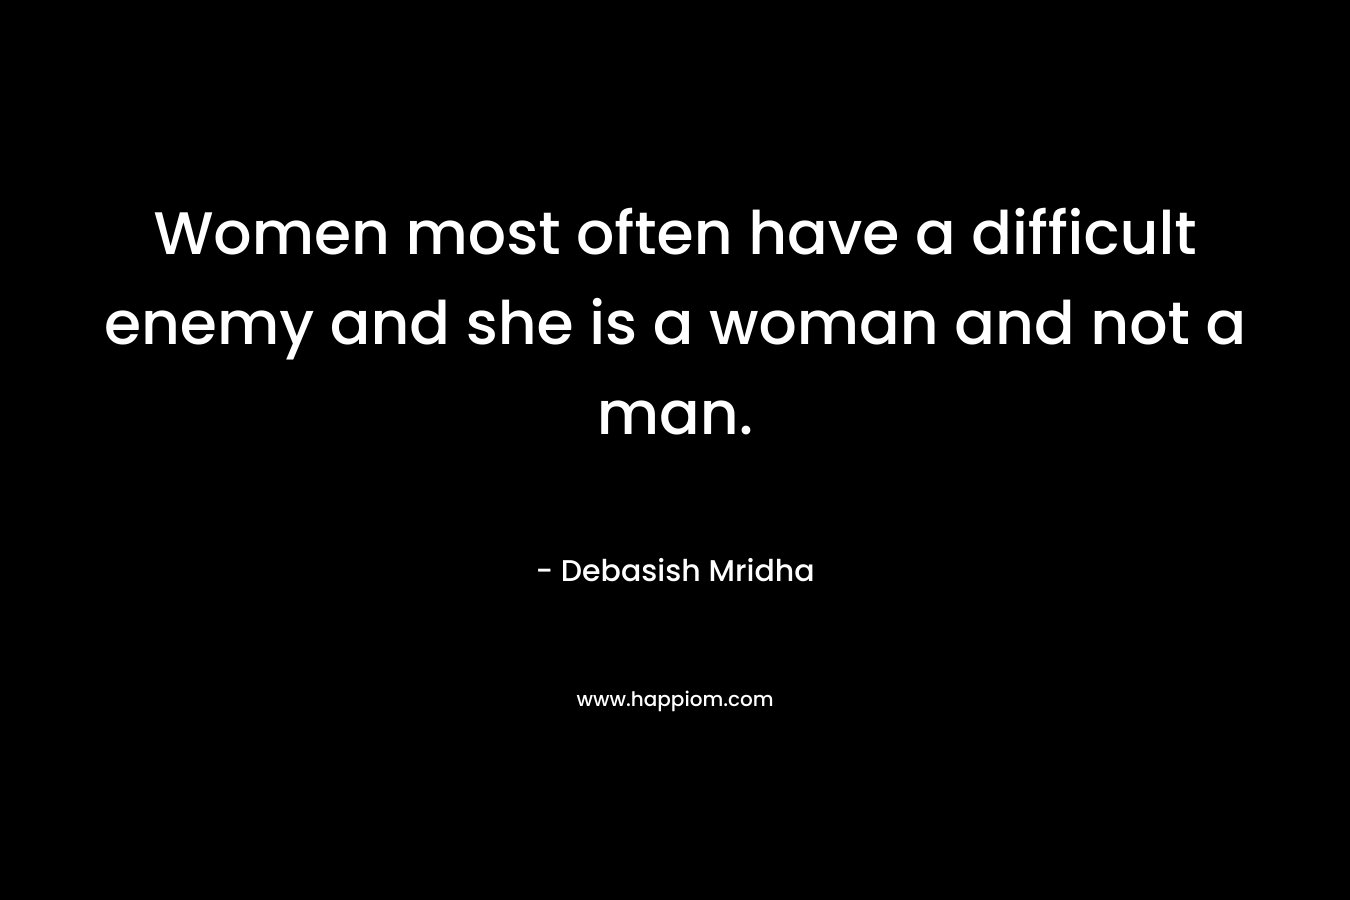 Women most often have a difficult enemy and she is a woman and not a man.